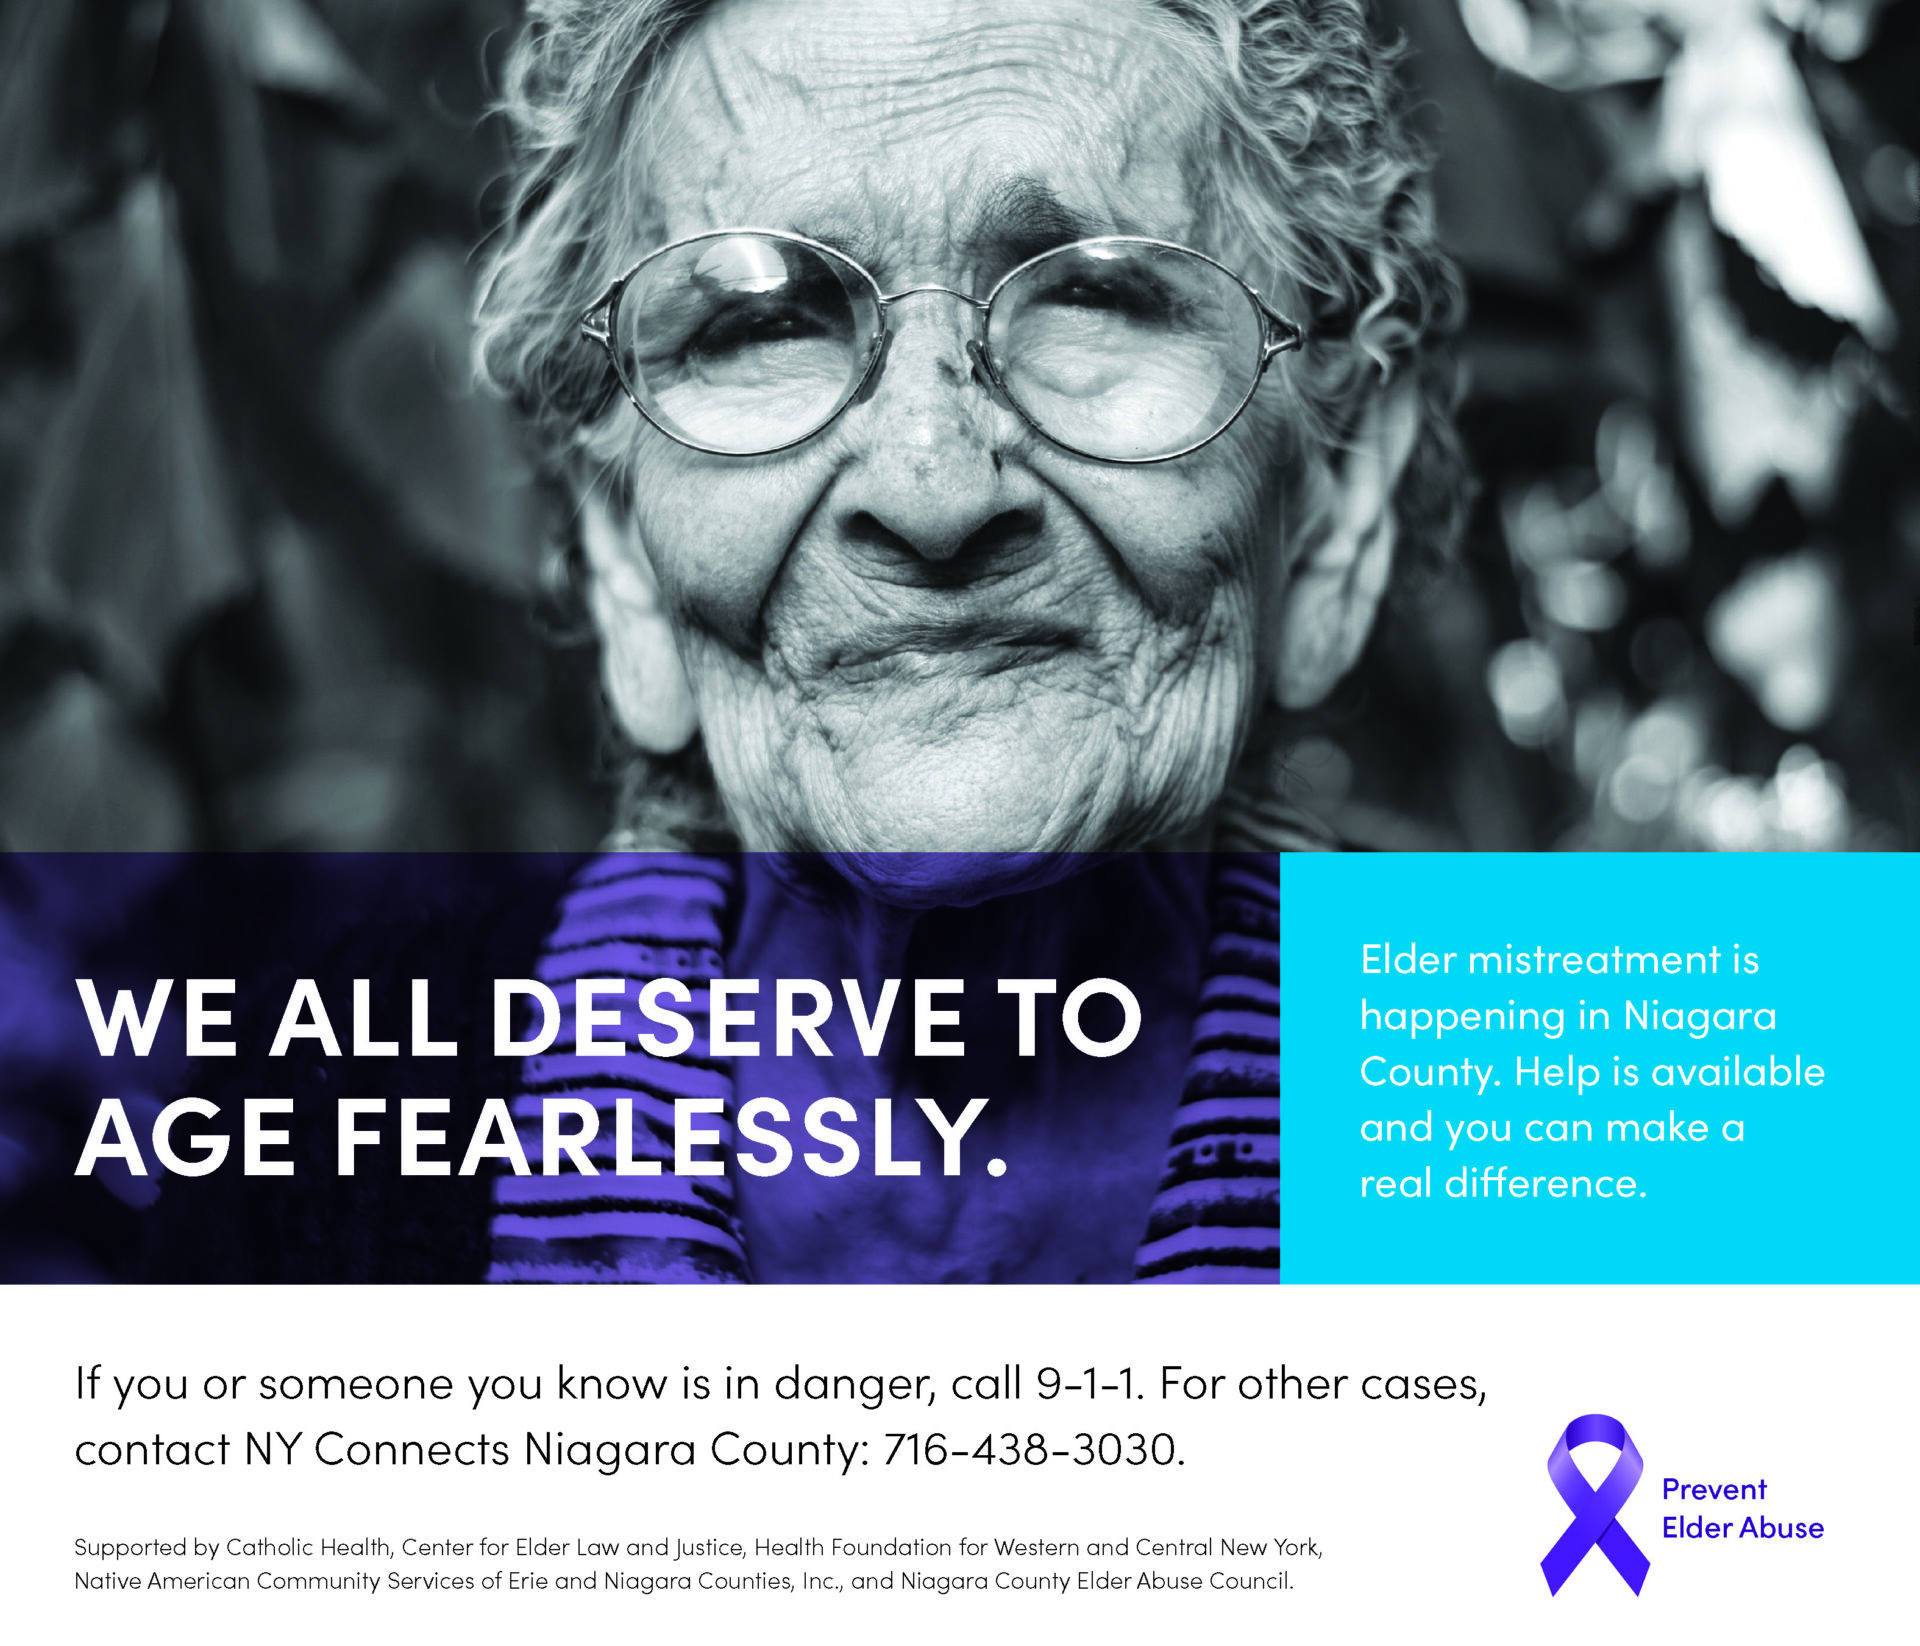 Elder Abuse Awareness campaign encourages public to take action